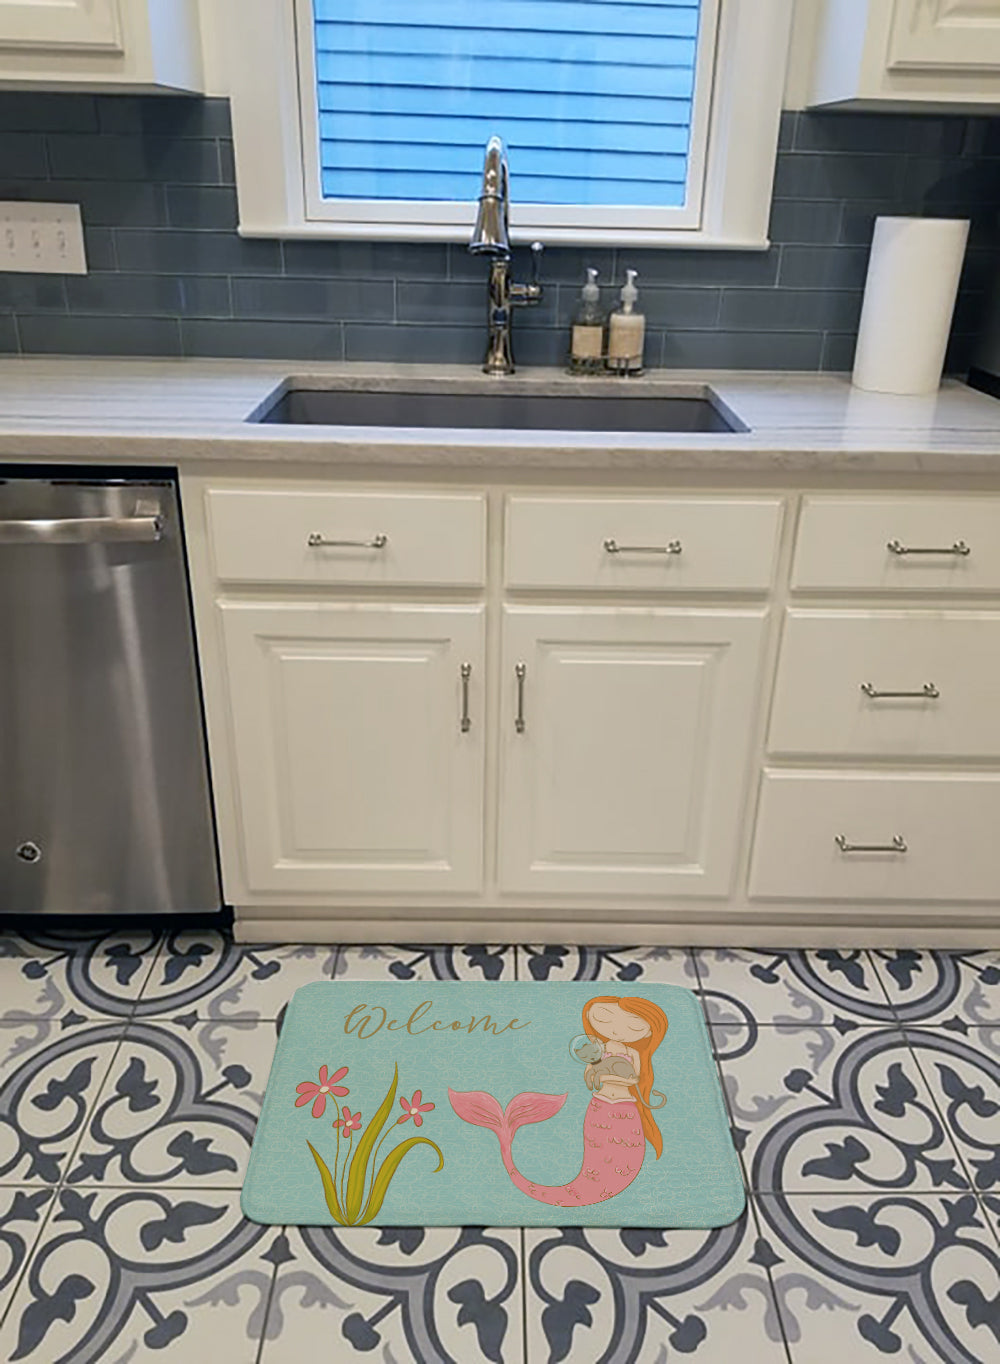 Mermaid with Cat Welcome Machine Washable Memory Foam Mat BB8548RUG - the-store.com